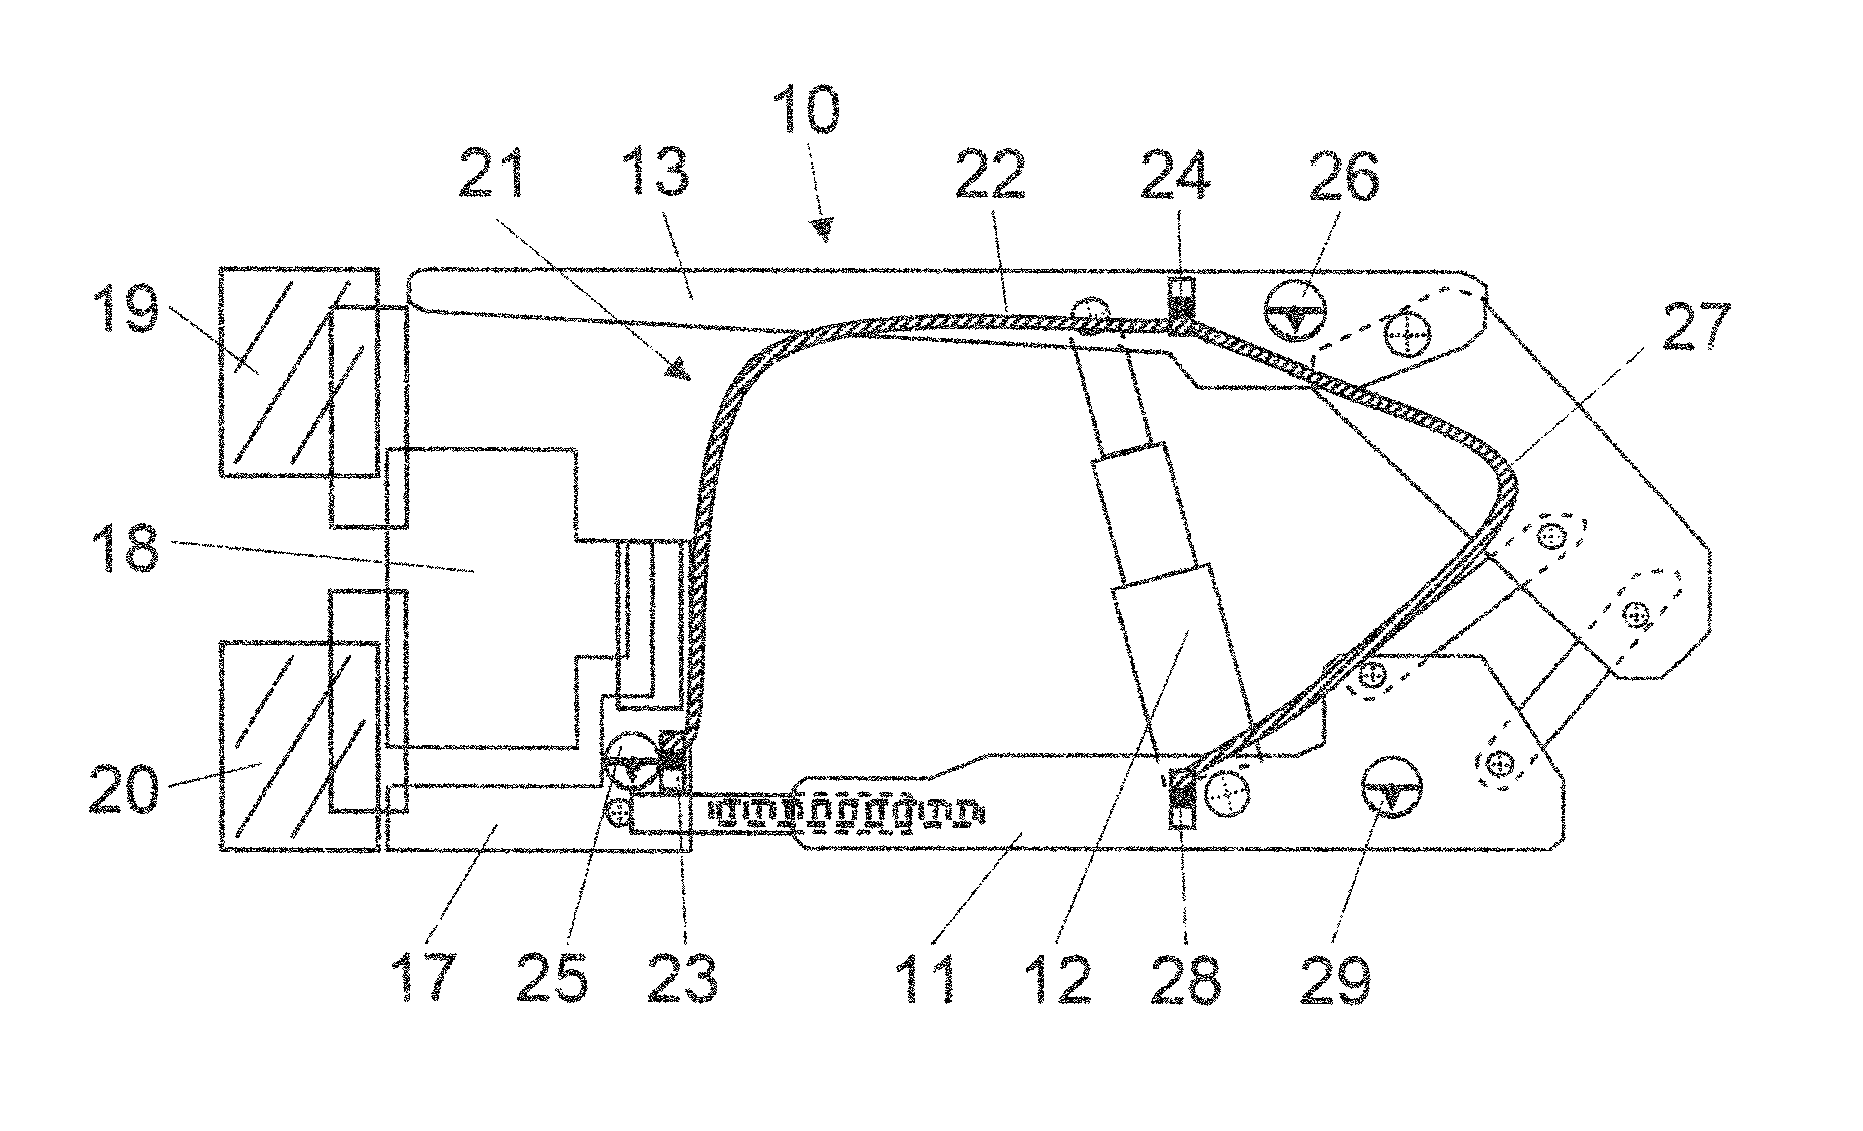 Face equipment comprising hose levels placed between the face conveyor and the shield support frames